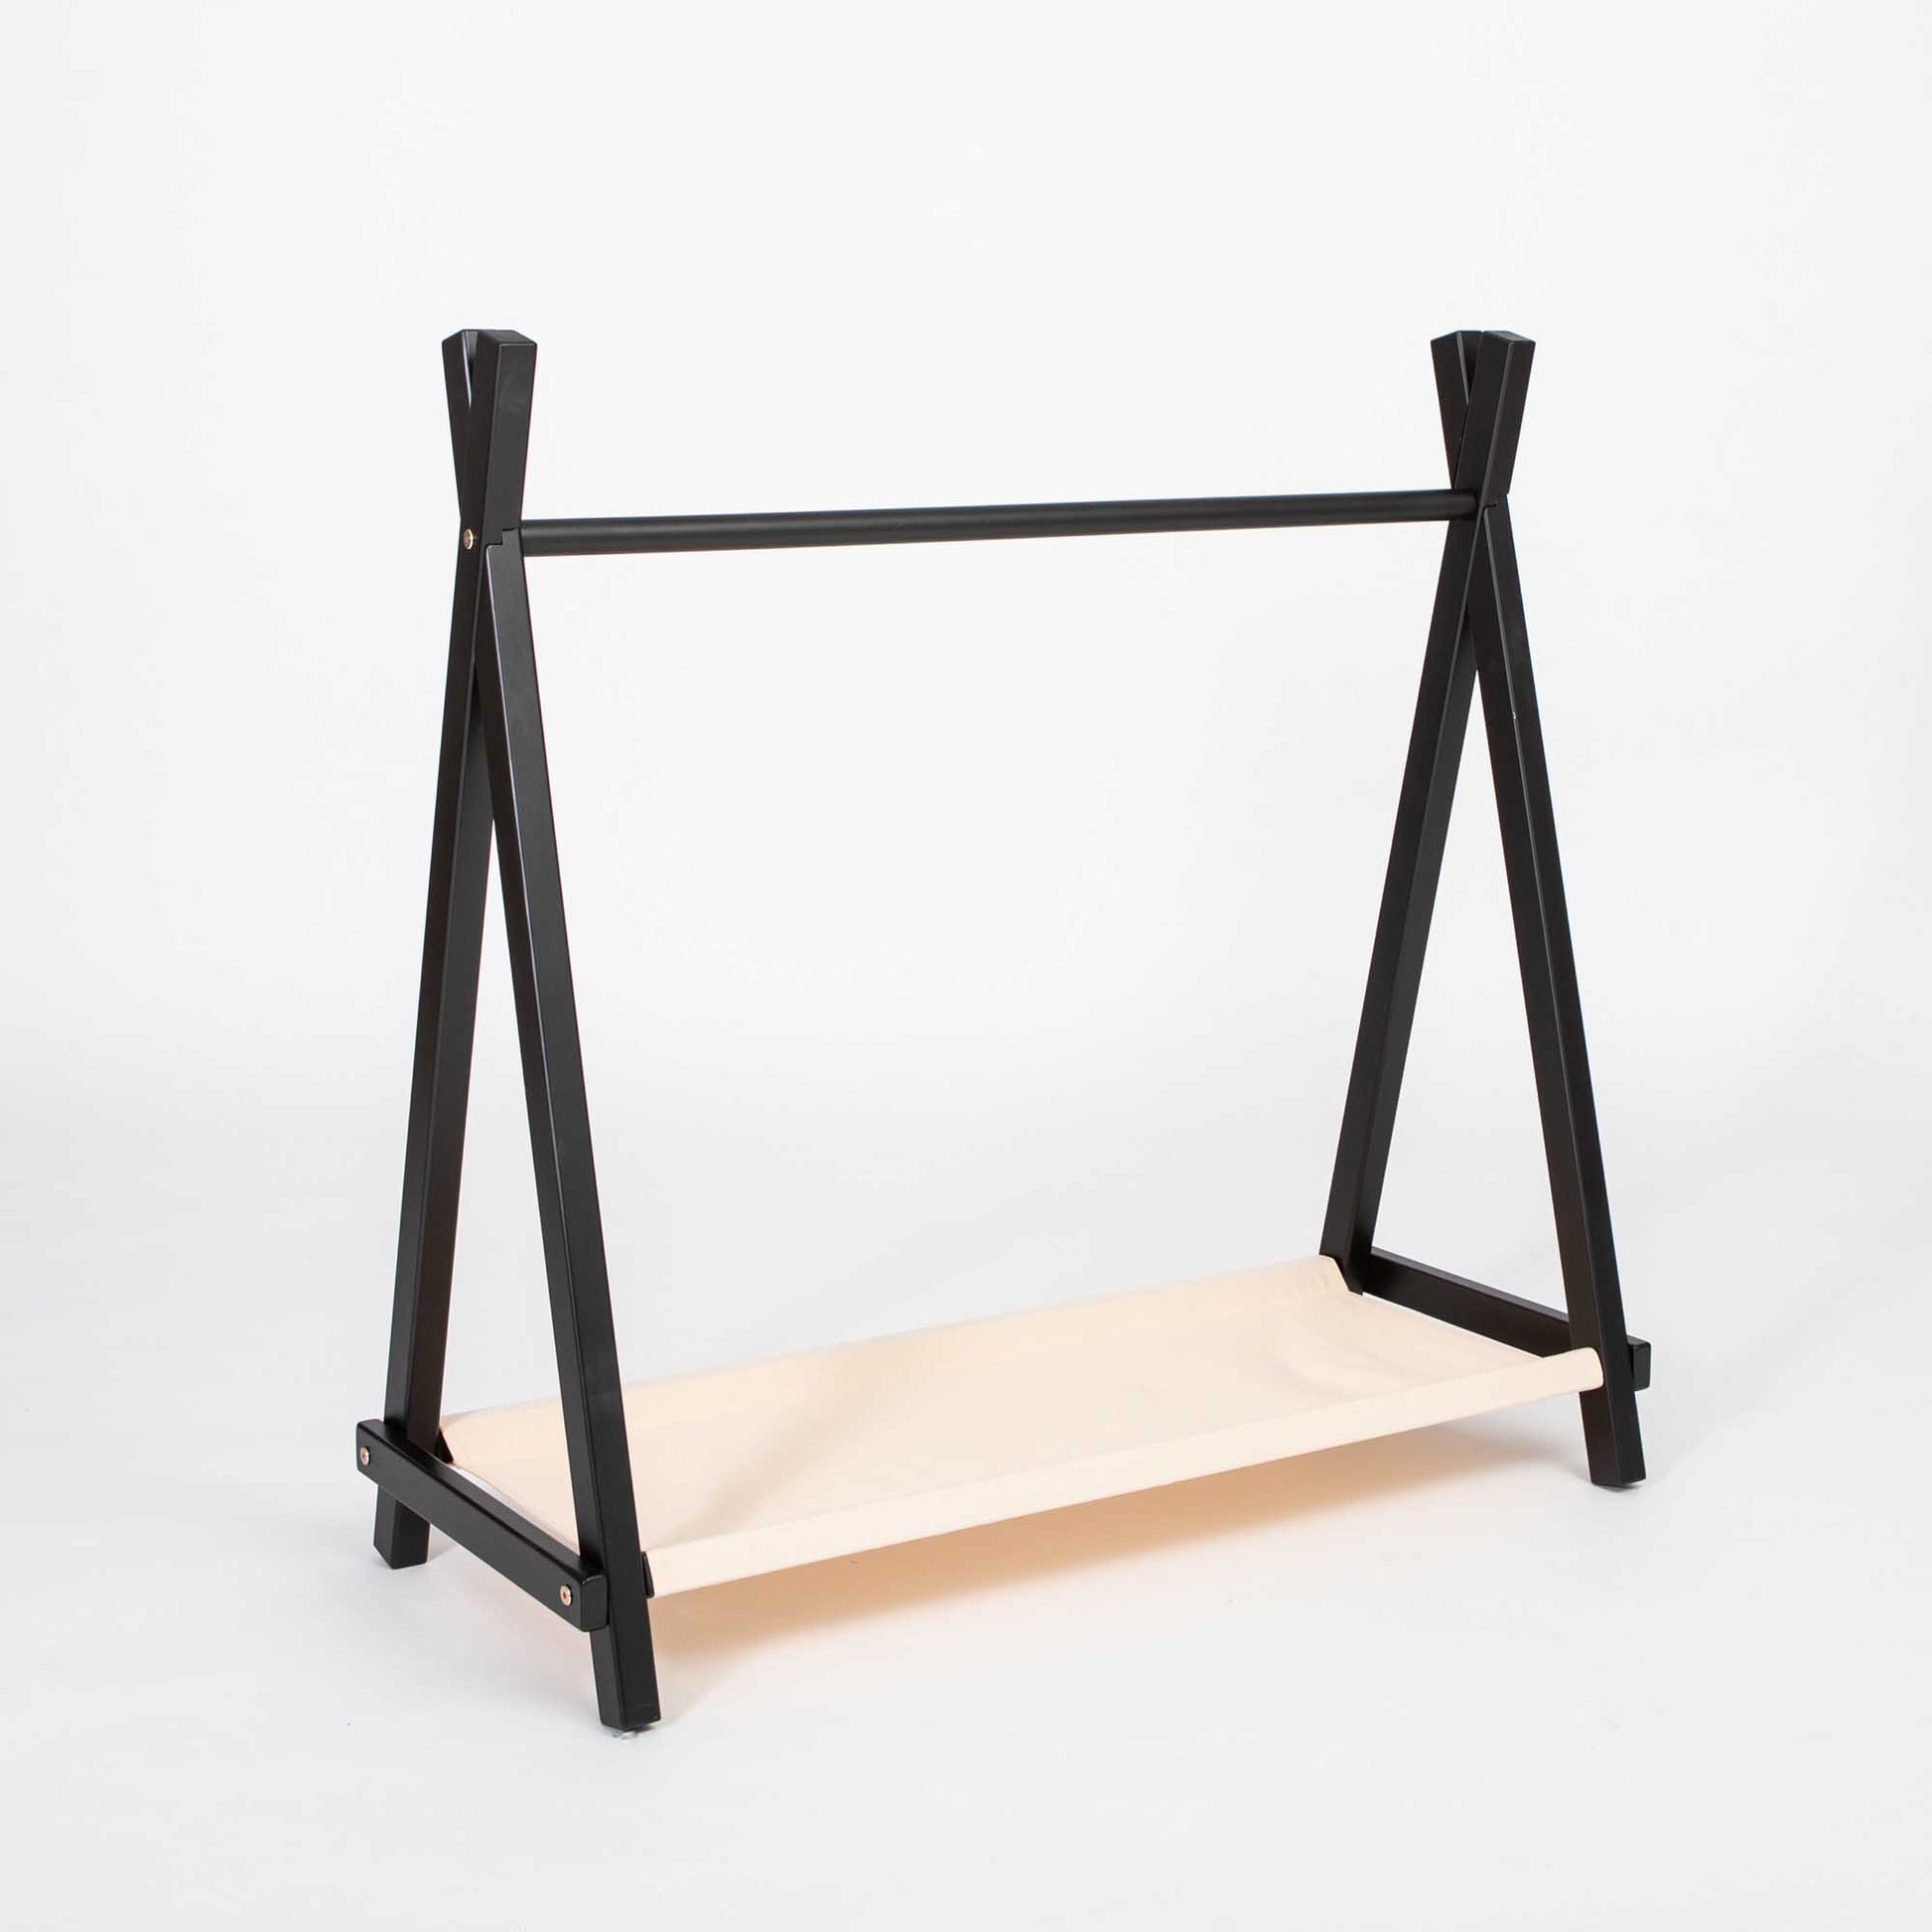 A black and white Kids' clothing rack with storage for Montessori storage, set against a pure white background.